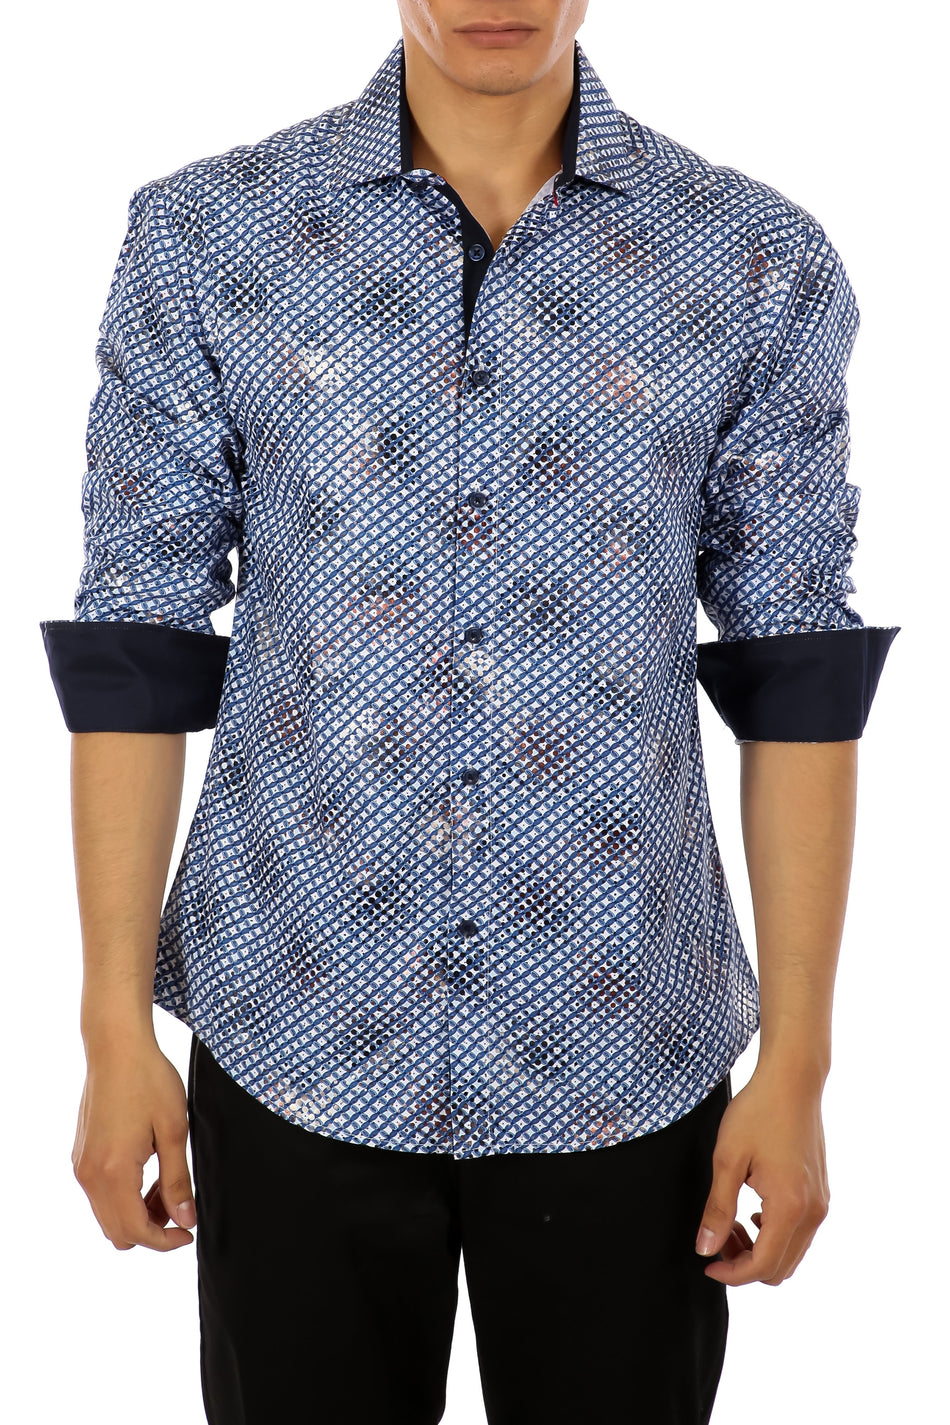 Graphic Checkered Navy Button Up Long Sleeve Dress Shirt